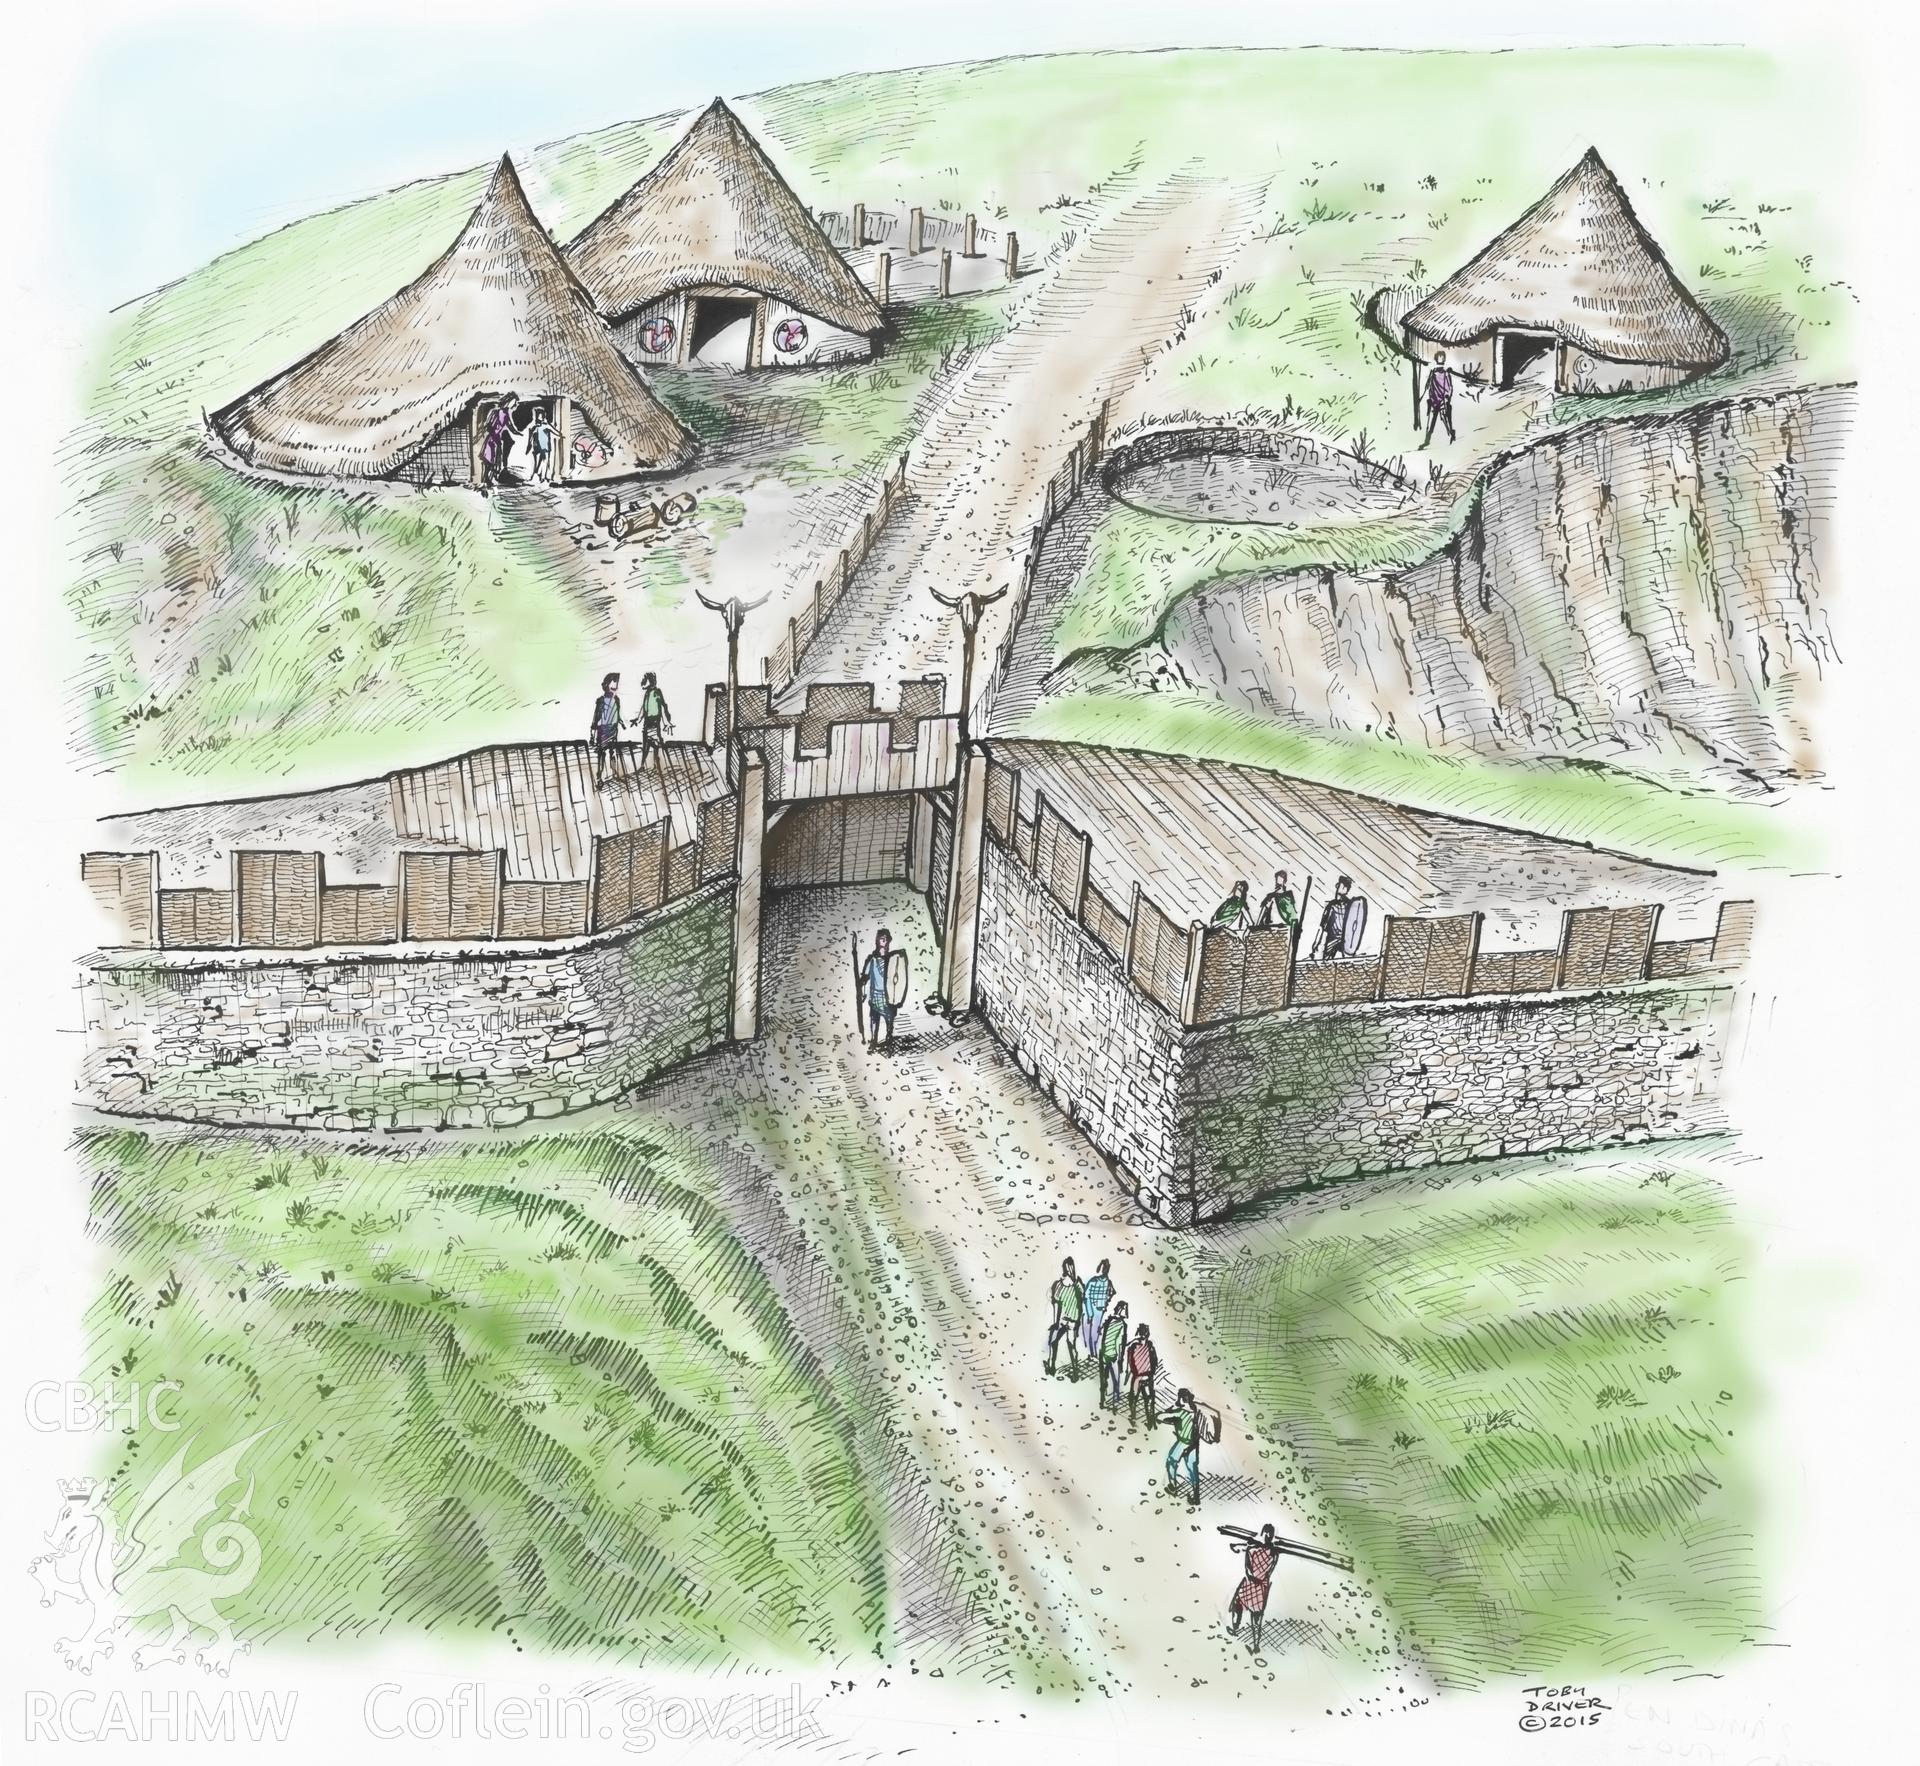 Pen Dinas .tiff version of a reconstruction drawing of the south gate of the south fort as it may have appeared at around 100BC. Figure 4.19, The Hillforts of Cardigan Bay, Toby Driver.